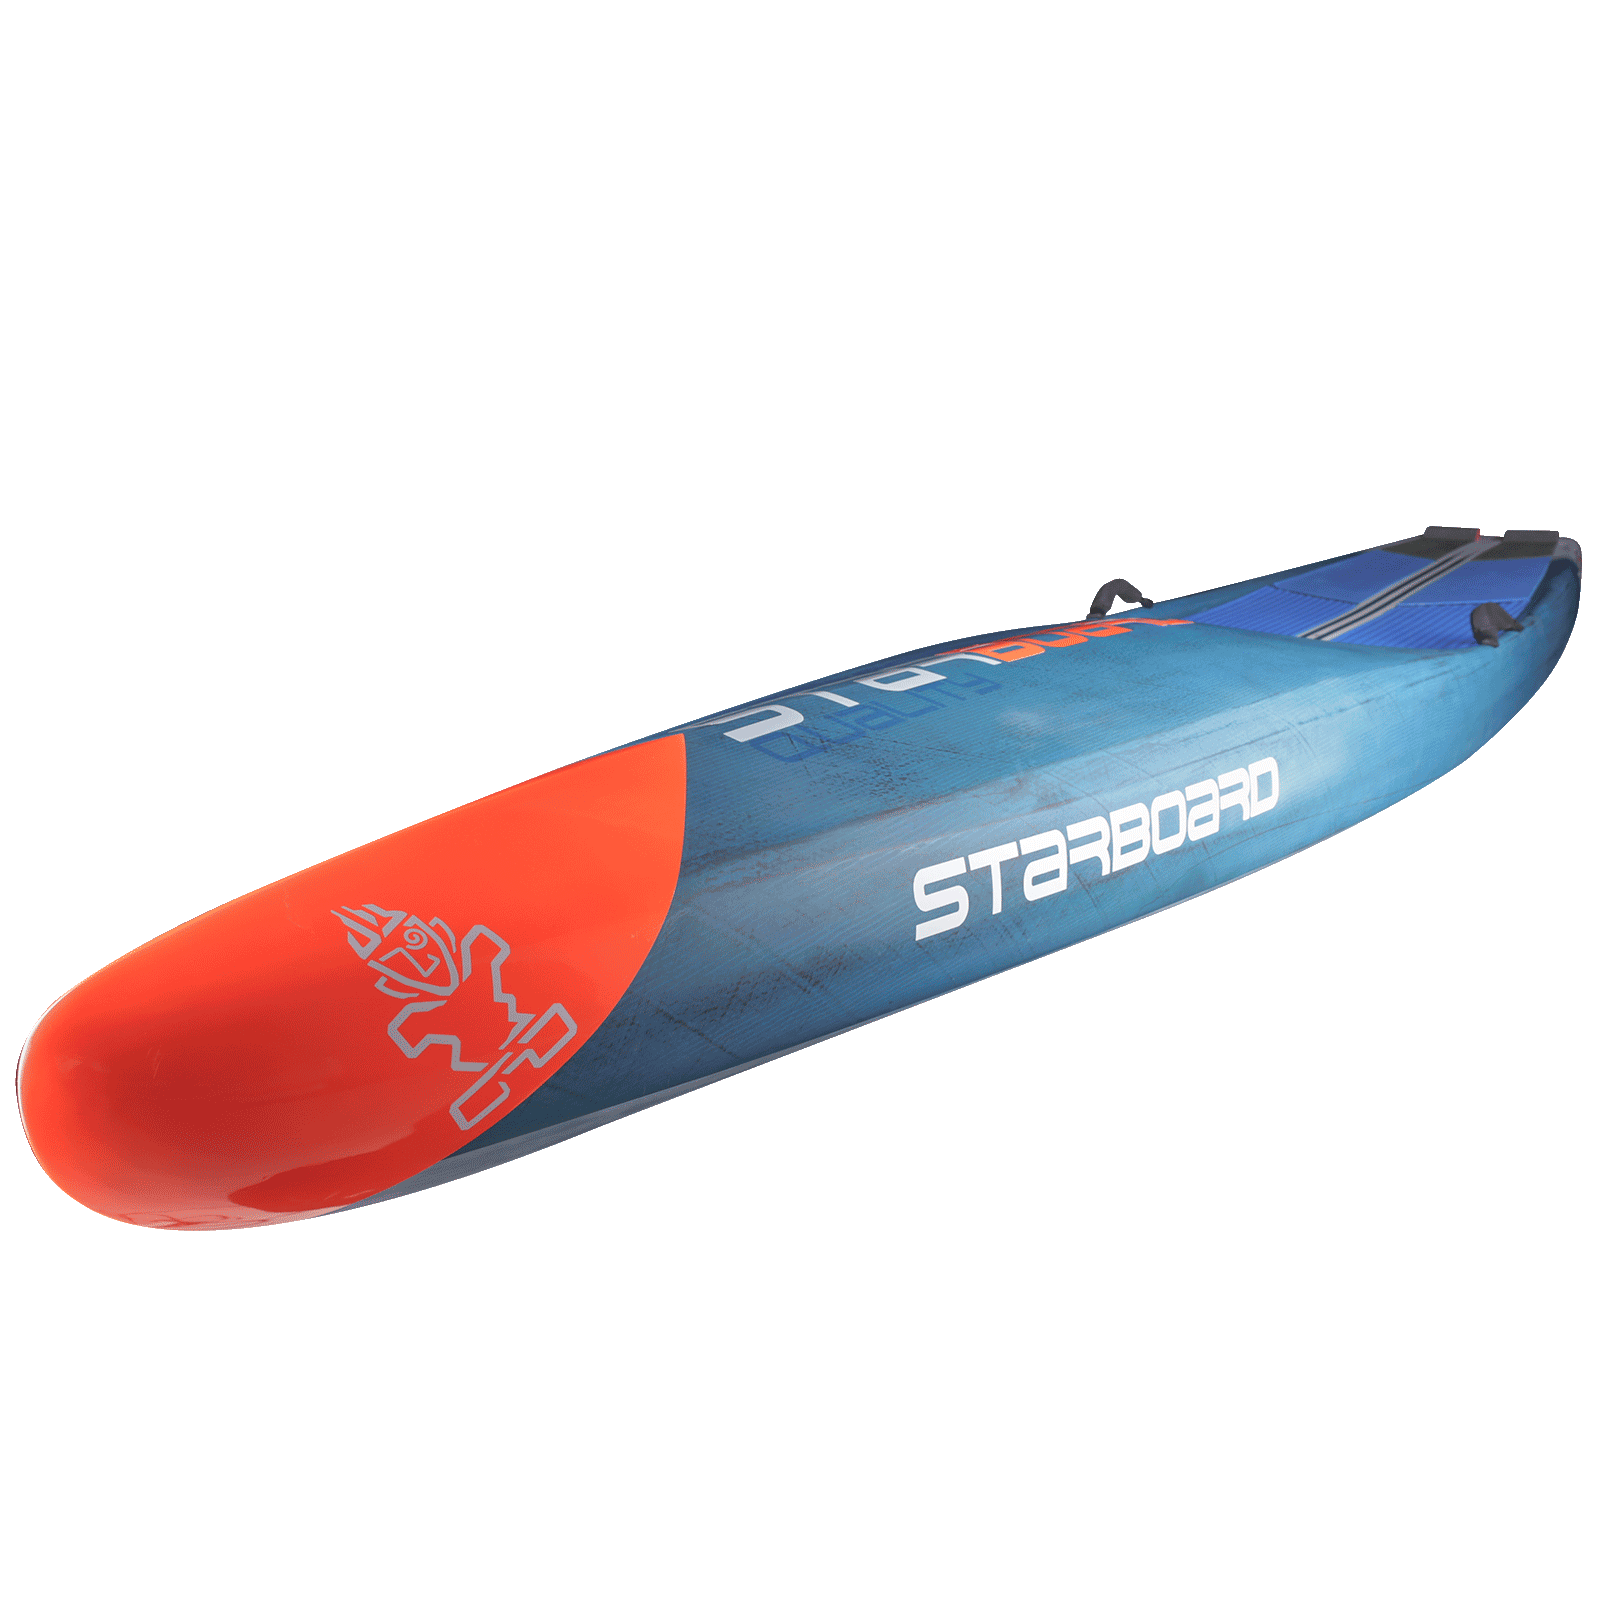 The new 2017 Starboard All Star... just gets better - SUPboarder